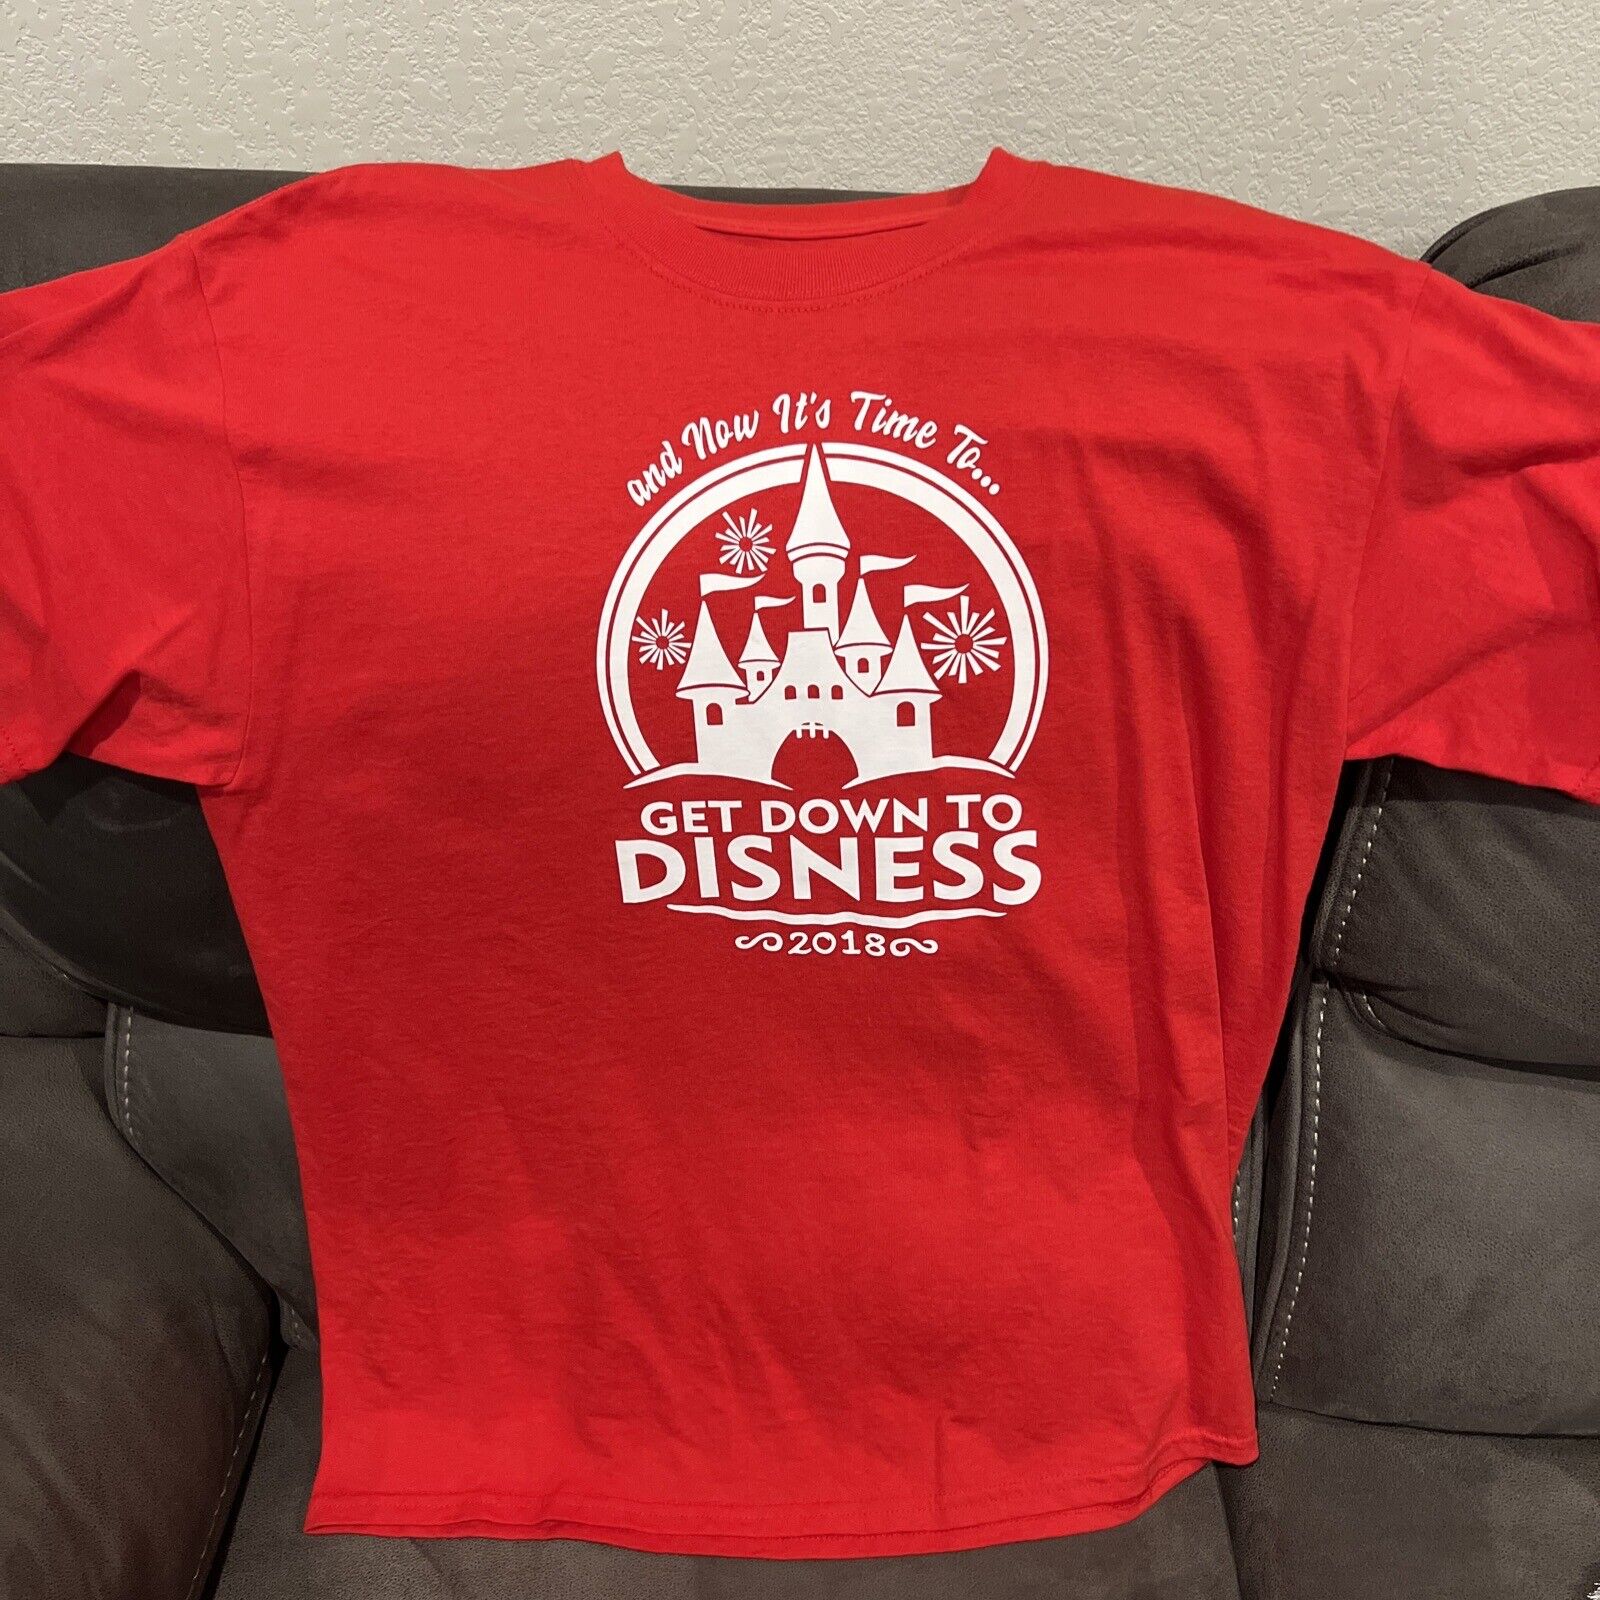 Disney Shirt - And Now It’s Time To Get Down To Disness 2018 - Large